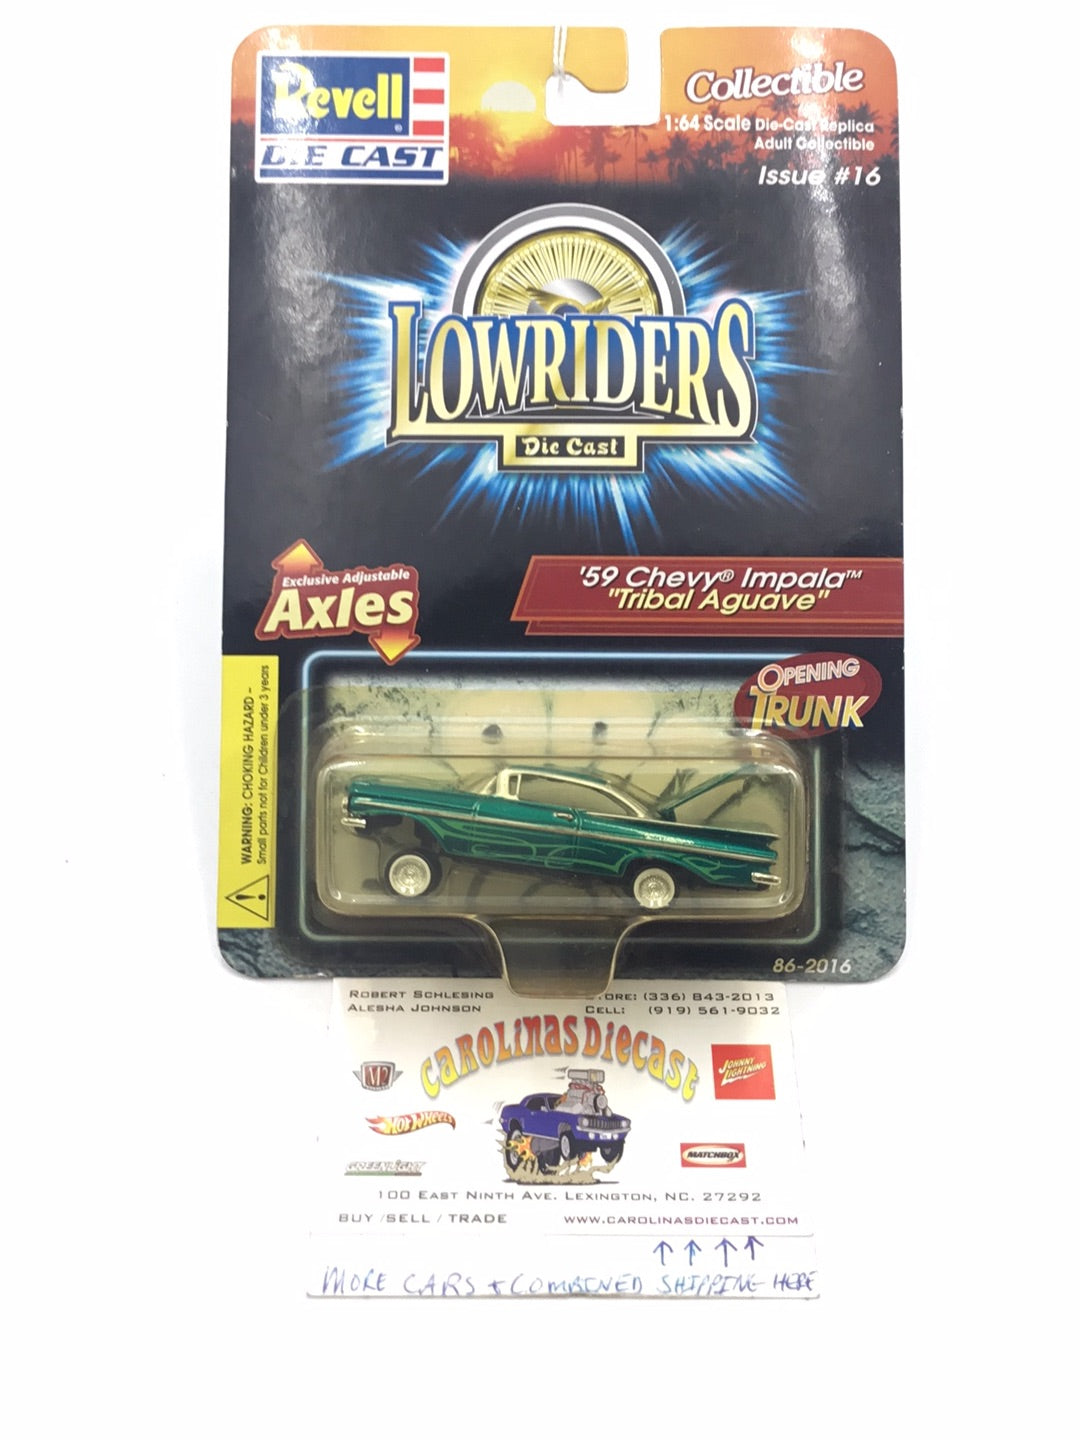 Revell Lowriders 1959 Chevy Impala Tribal Aguave #2